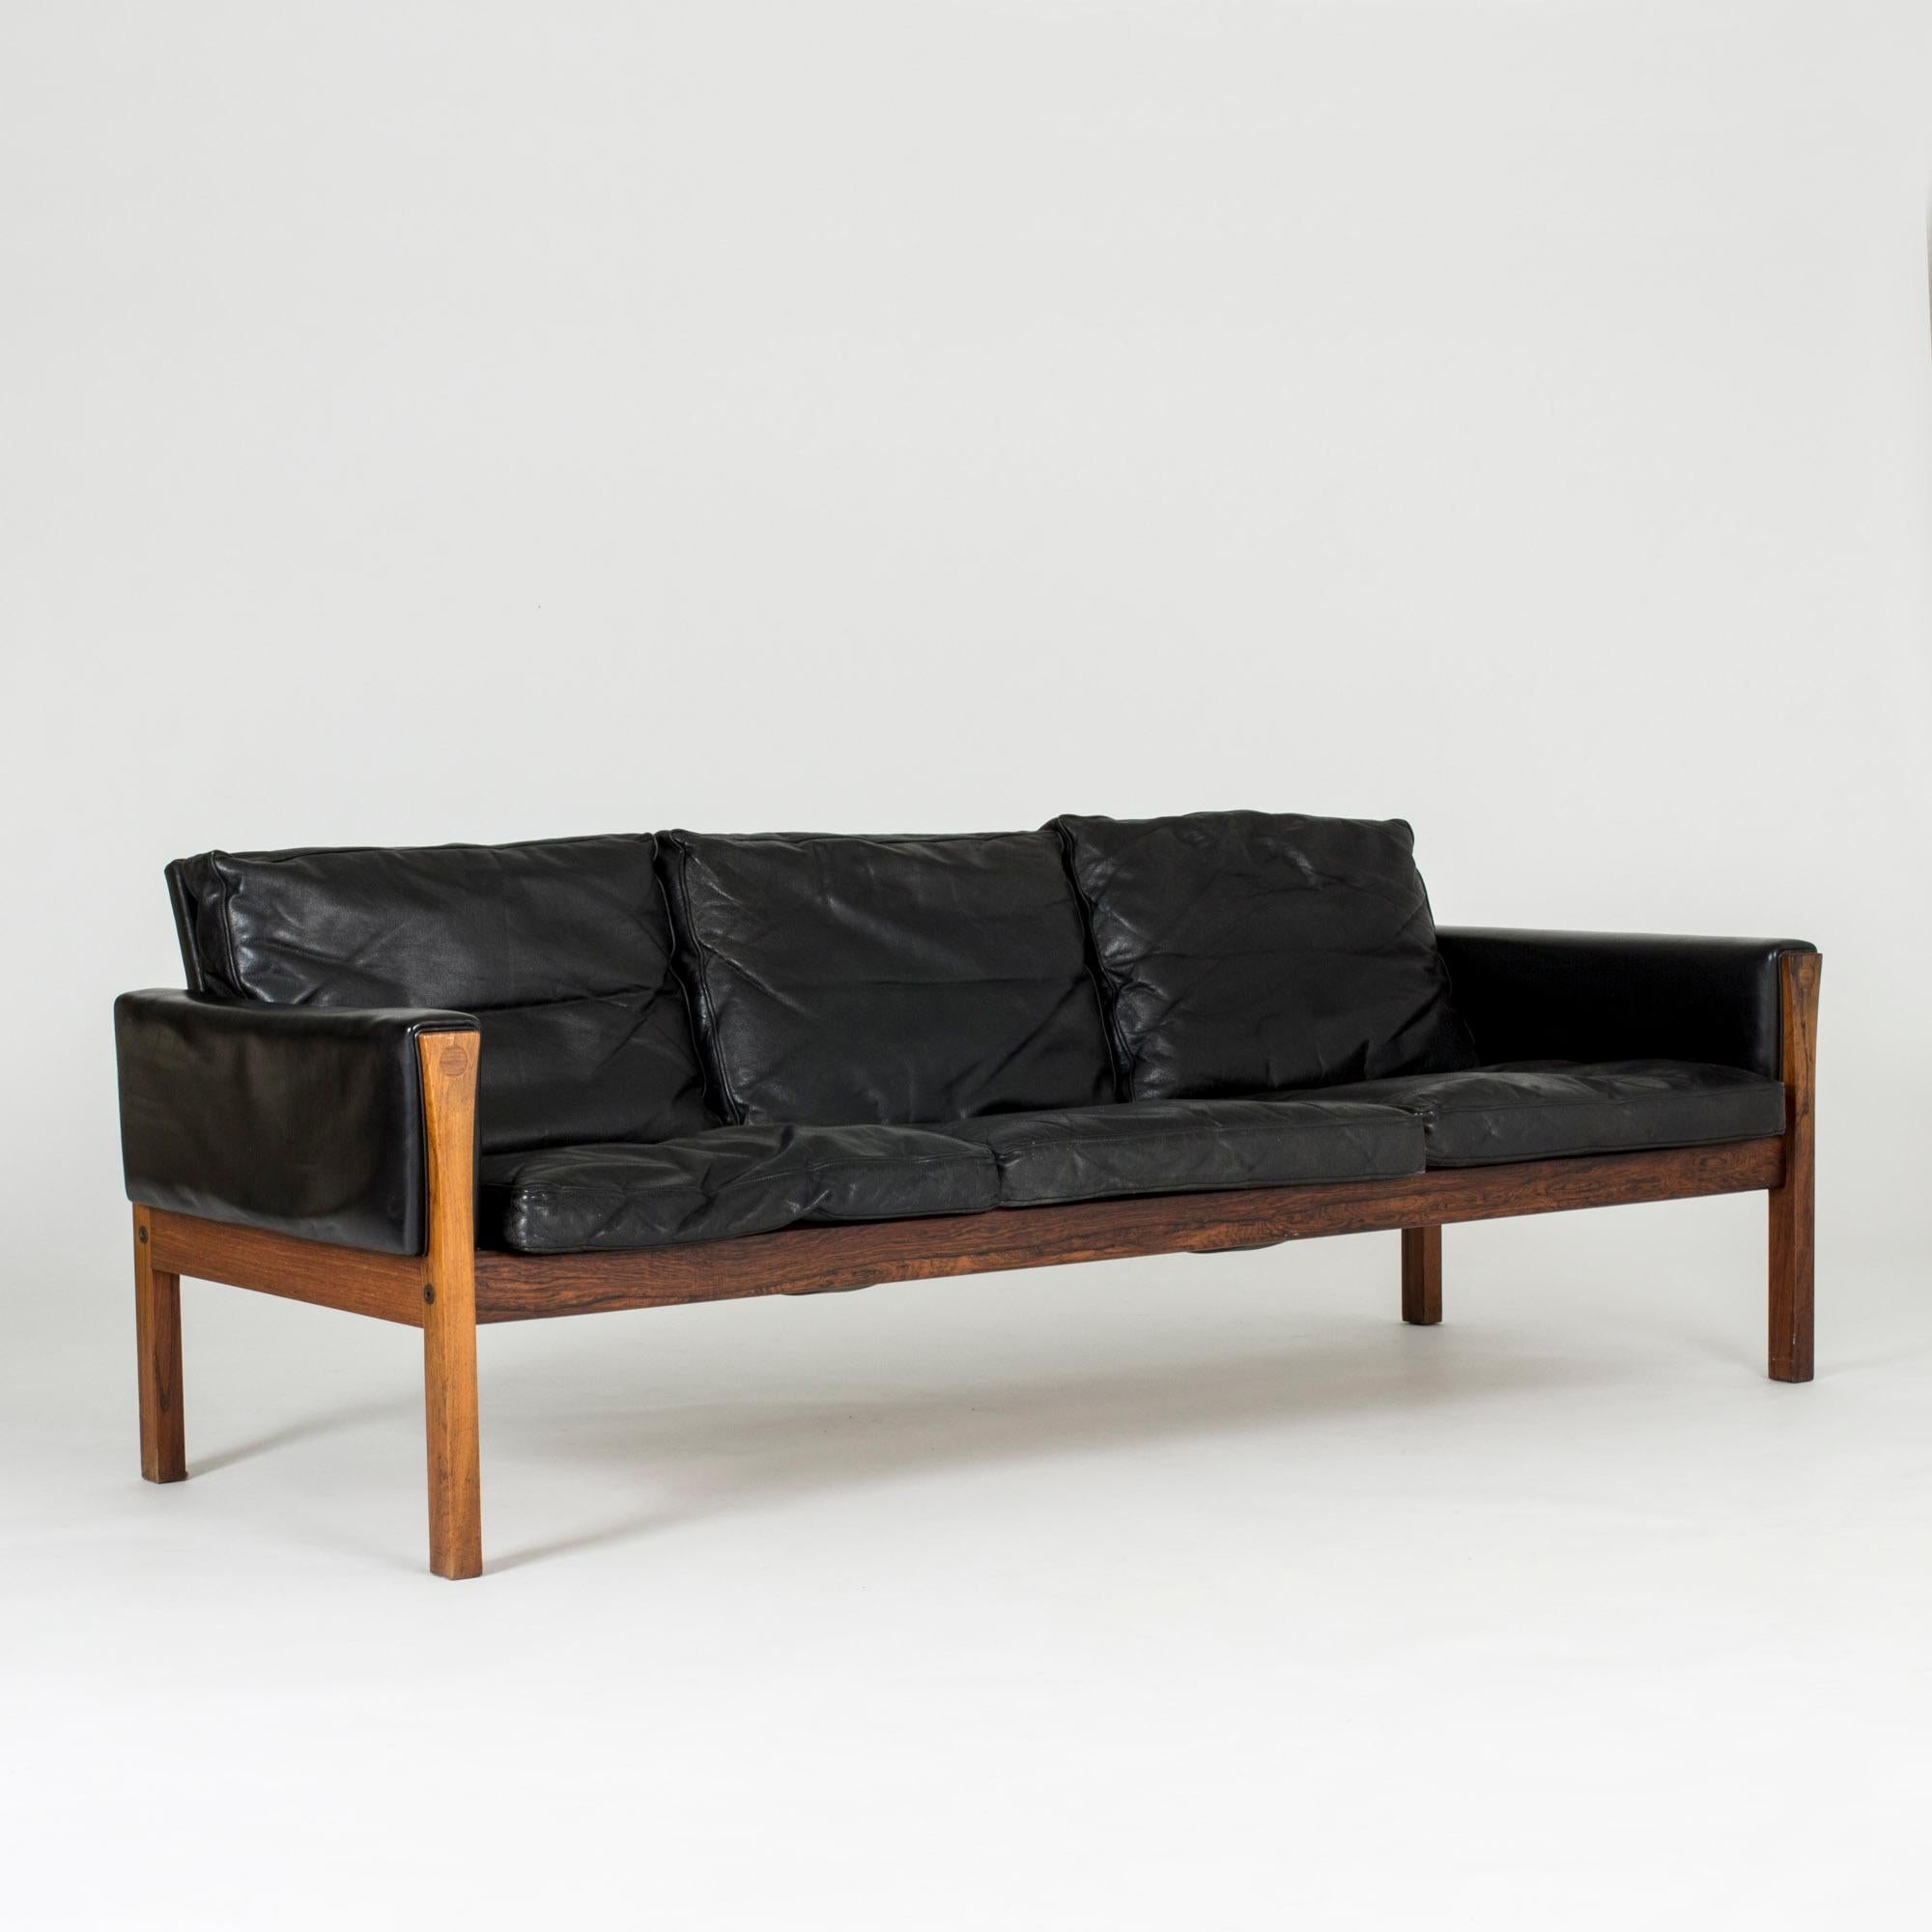 Elegant, luxurious “CH 163” sofa by Hans J. Wegner, made with a rosewood frame and black leather upholstery. Nice details of circles inlaid into the wood and leather folded over the armrests. Nicely aged leather.